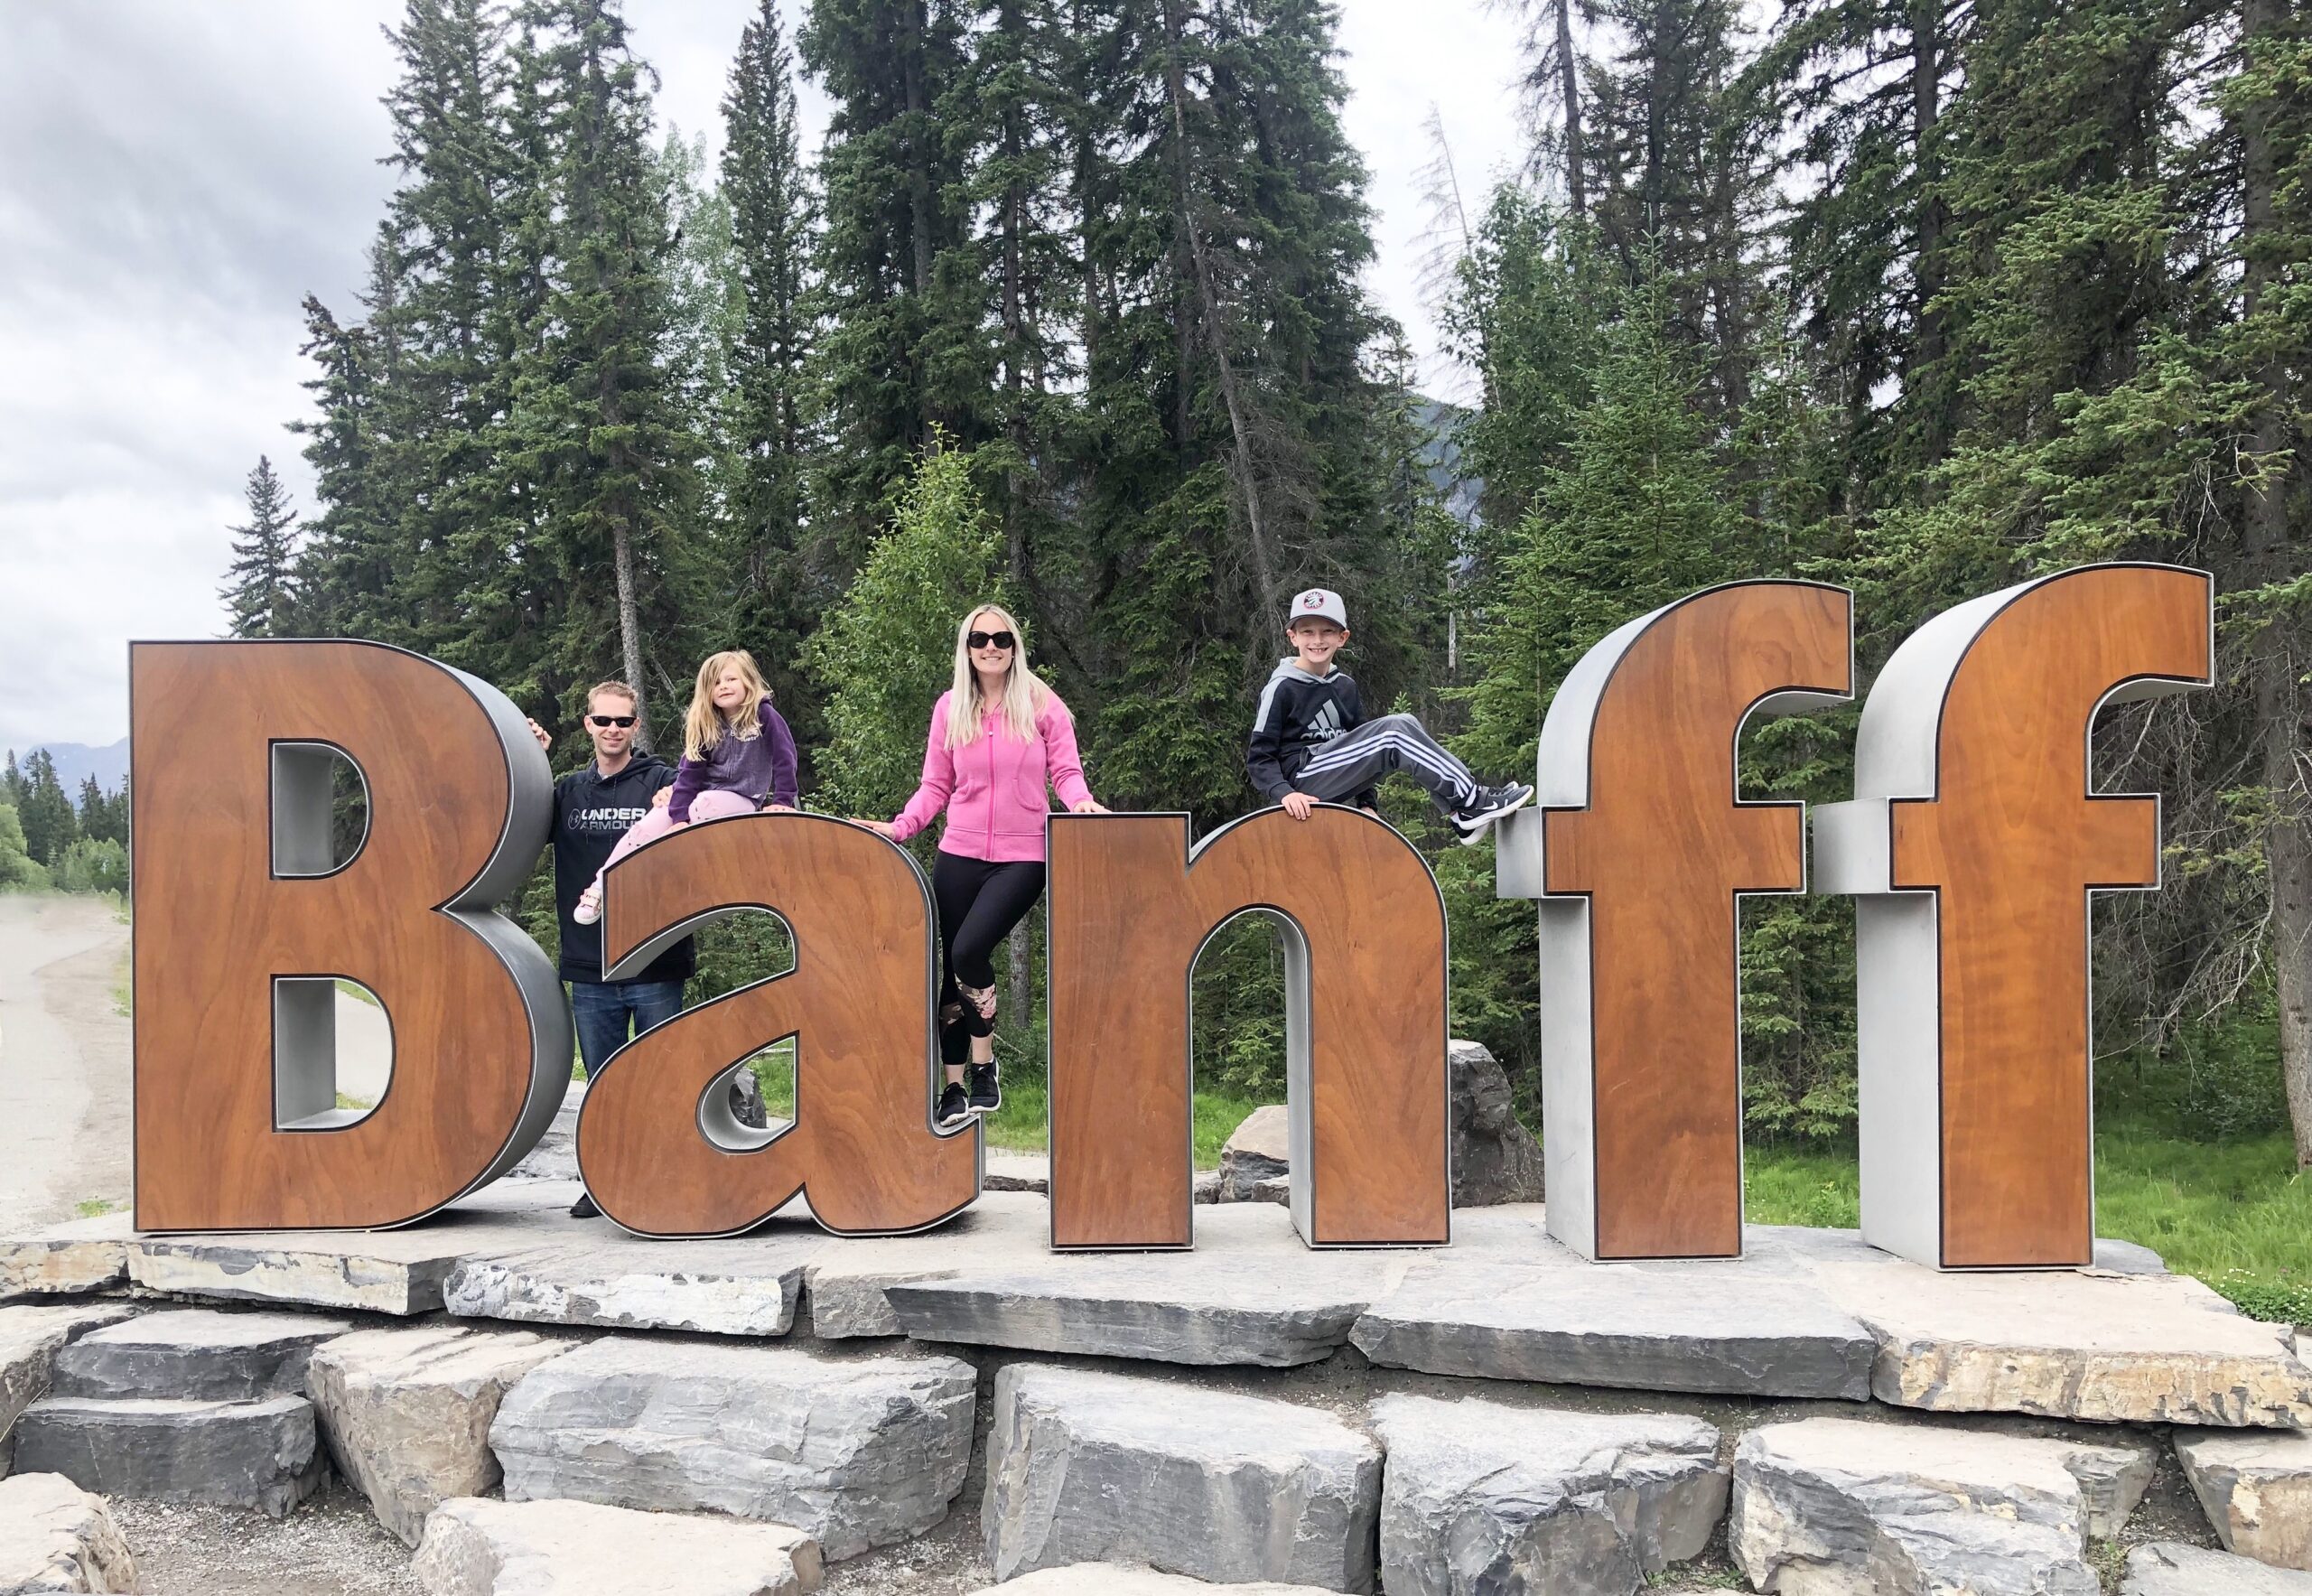 Banff Travel Guide on Livin' Life with Style